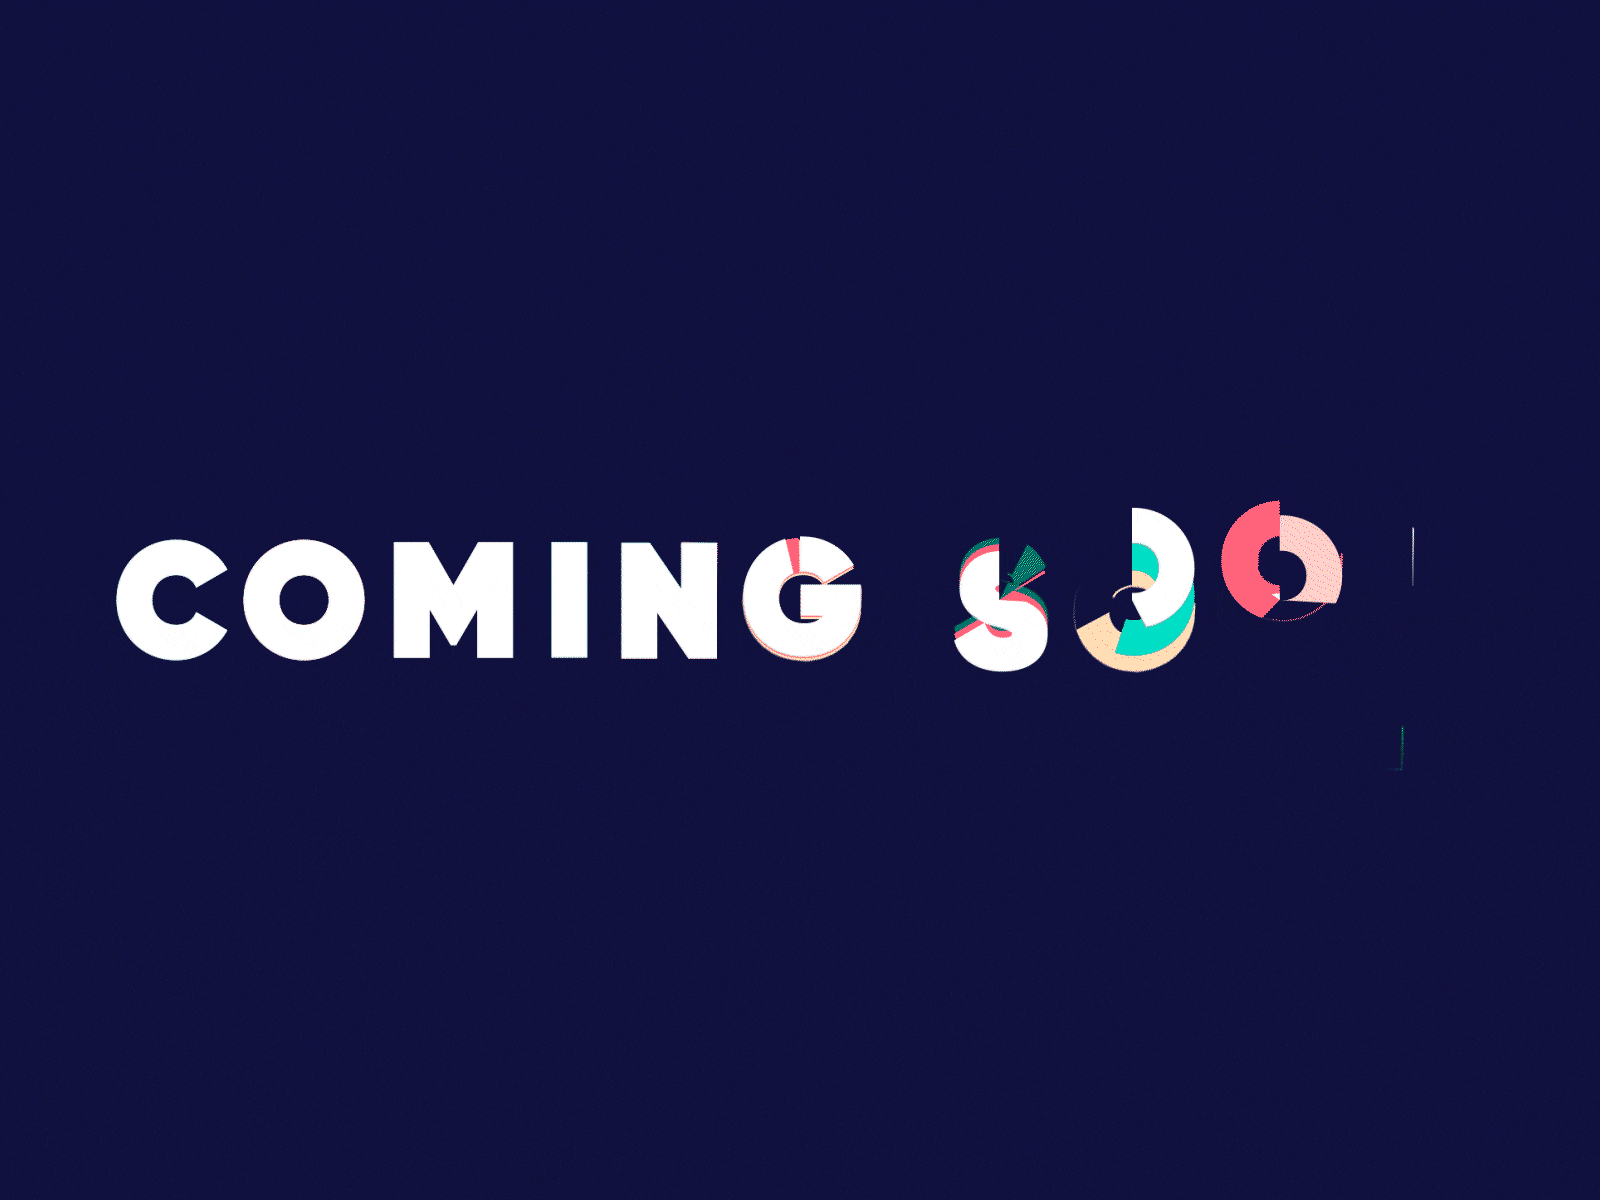 Coming soon... adobe after effects aftereffects animated animatedgif animation colorful colors coming comingsoon fun gif graphic design motion graphics playful soon